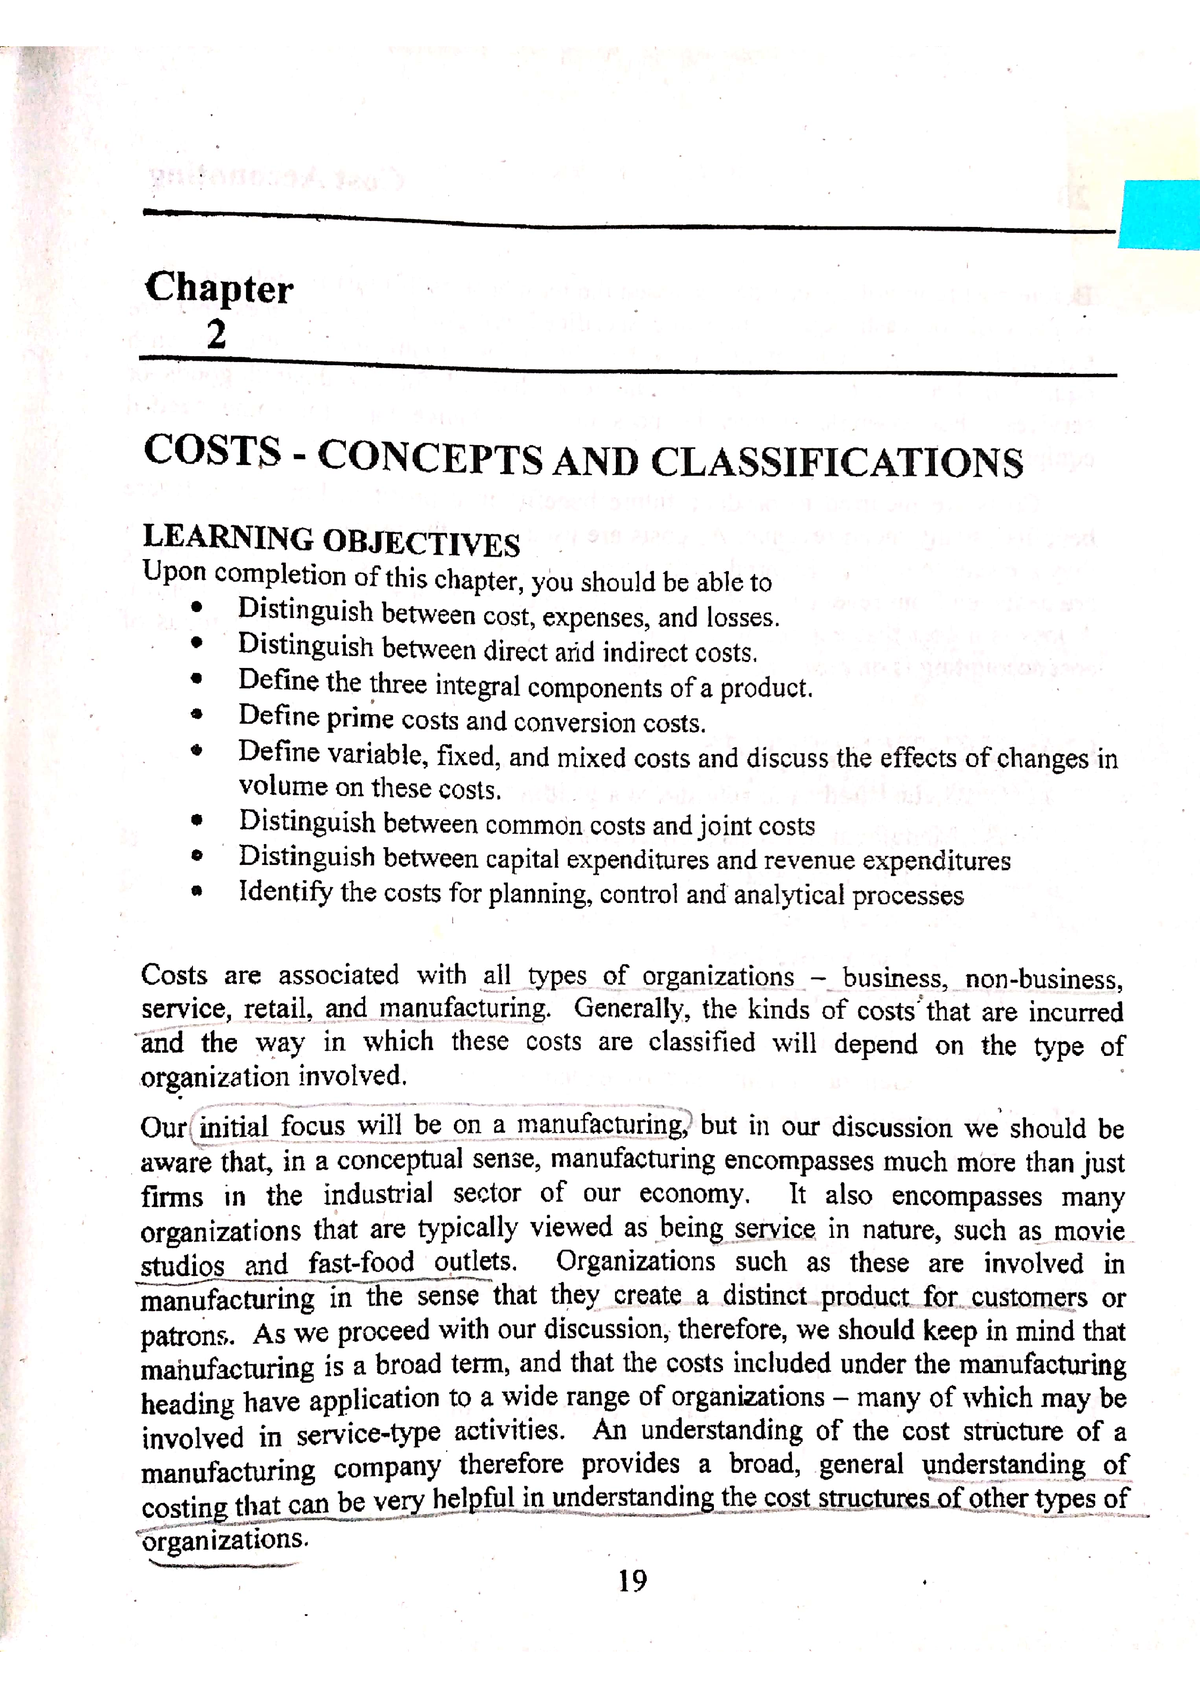 cost accounting chapter 2 homework solutions